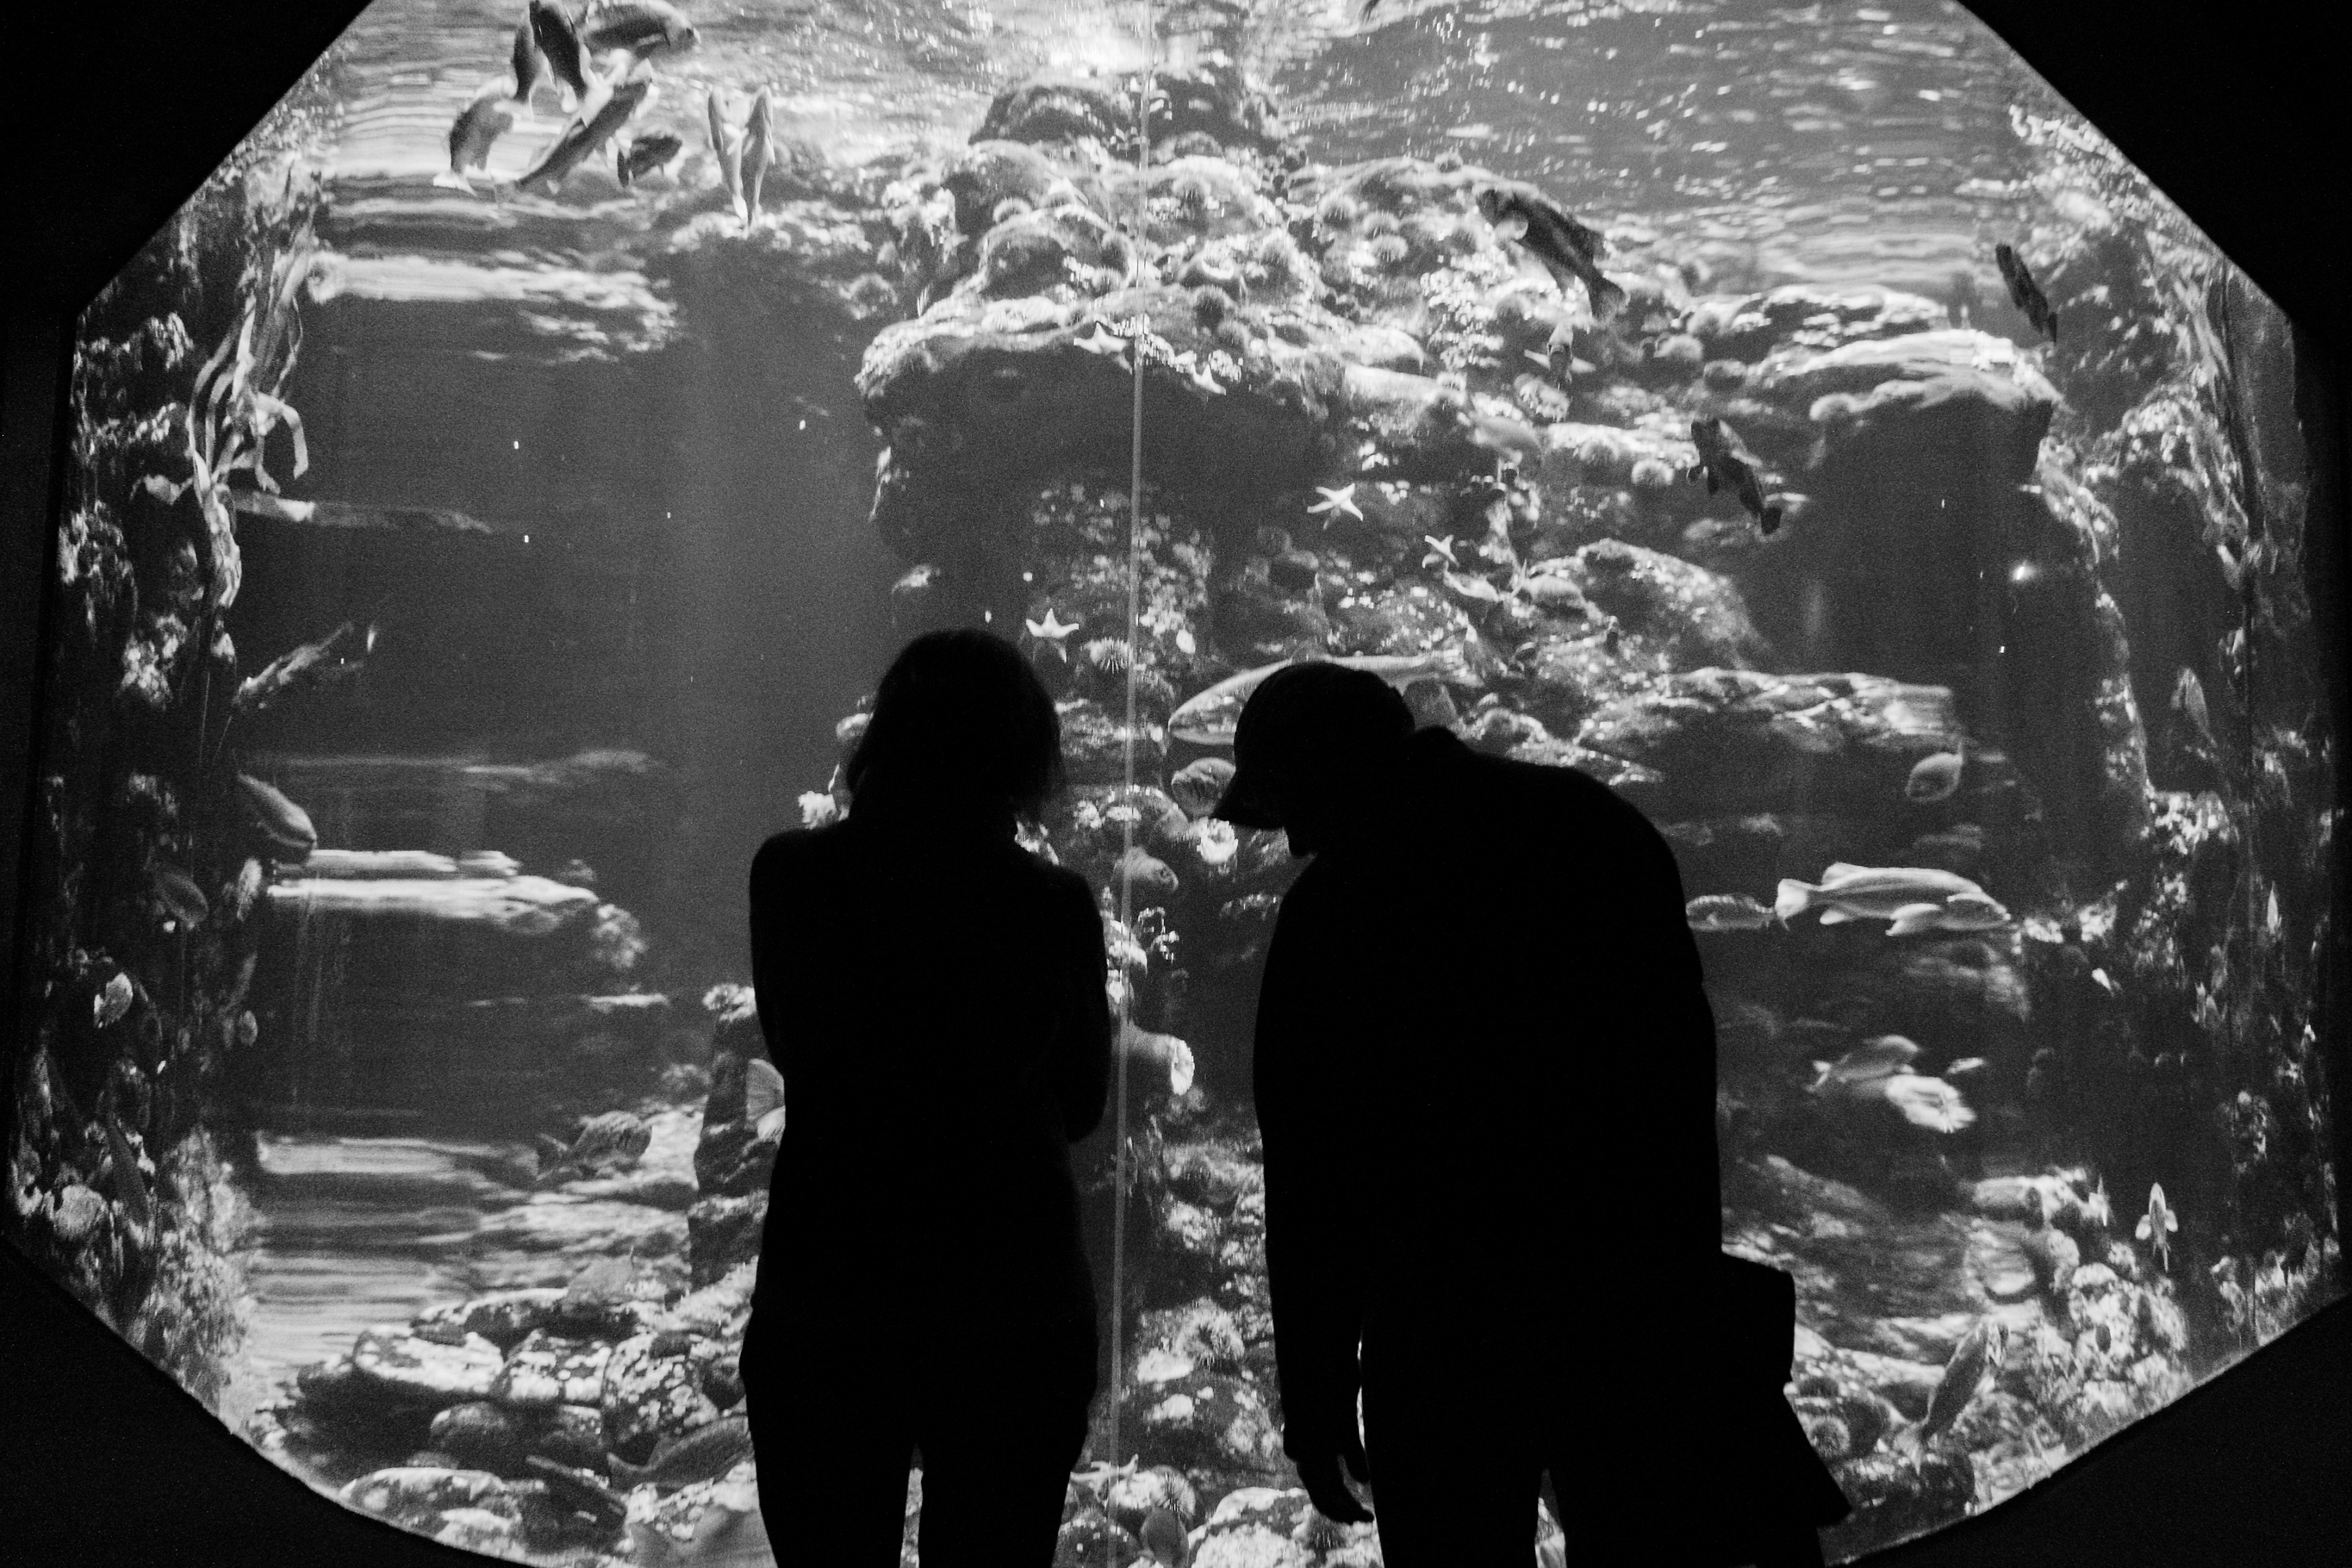 This black-and-white image shows two silhouetted individuals standing in front of a large aquarium, filled with various fish and a rocky underwater landscape.